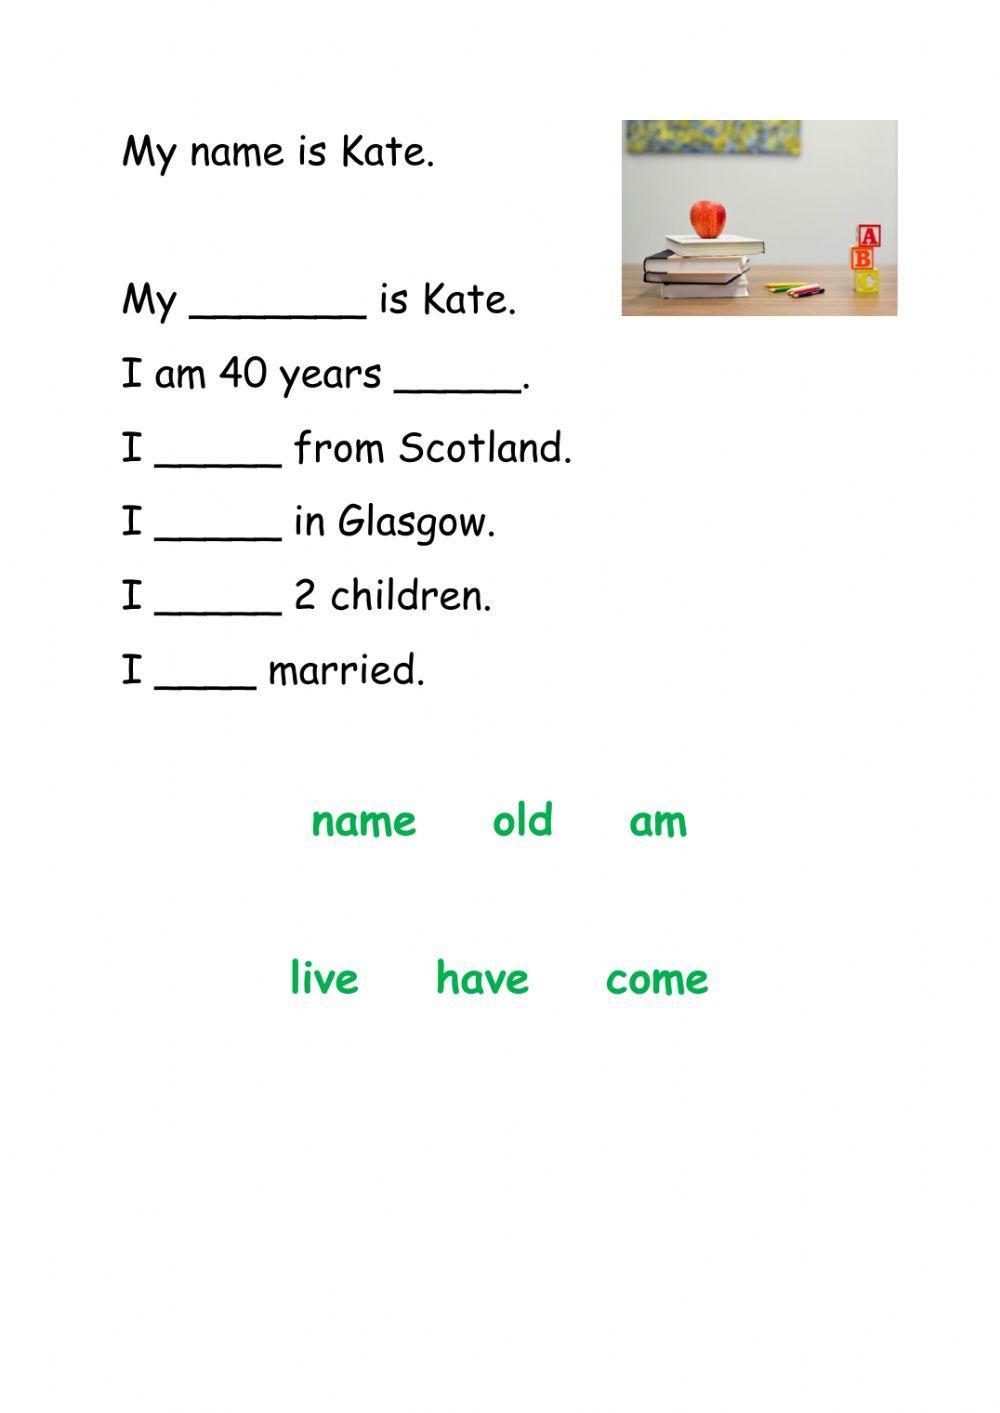 My name is Kate